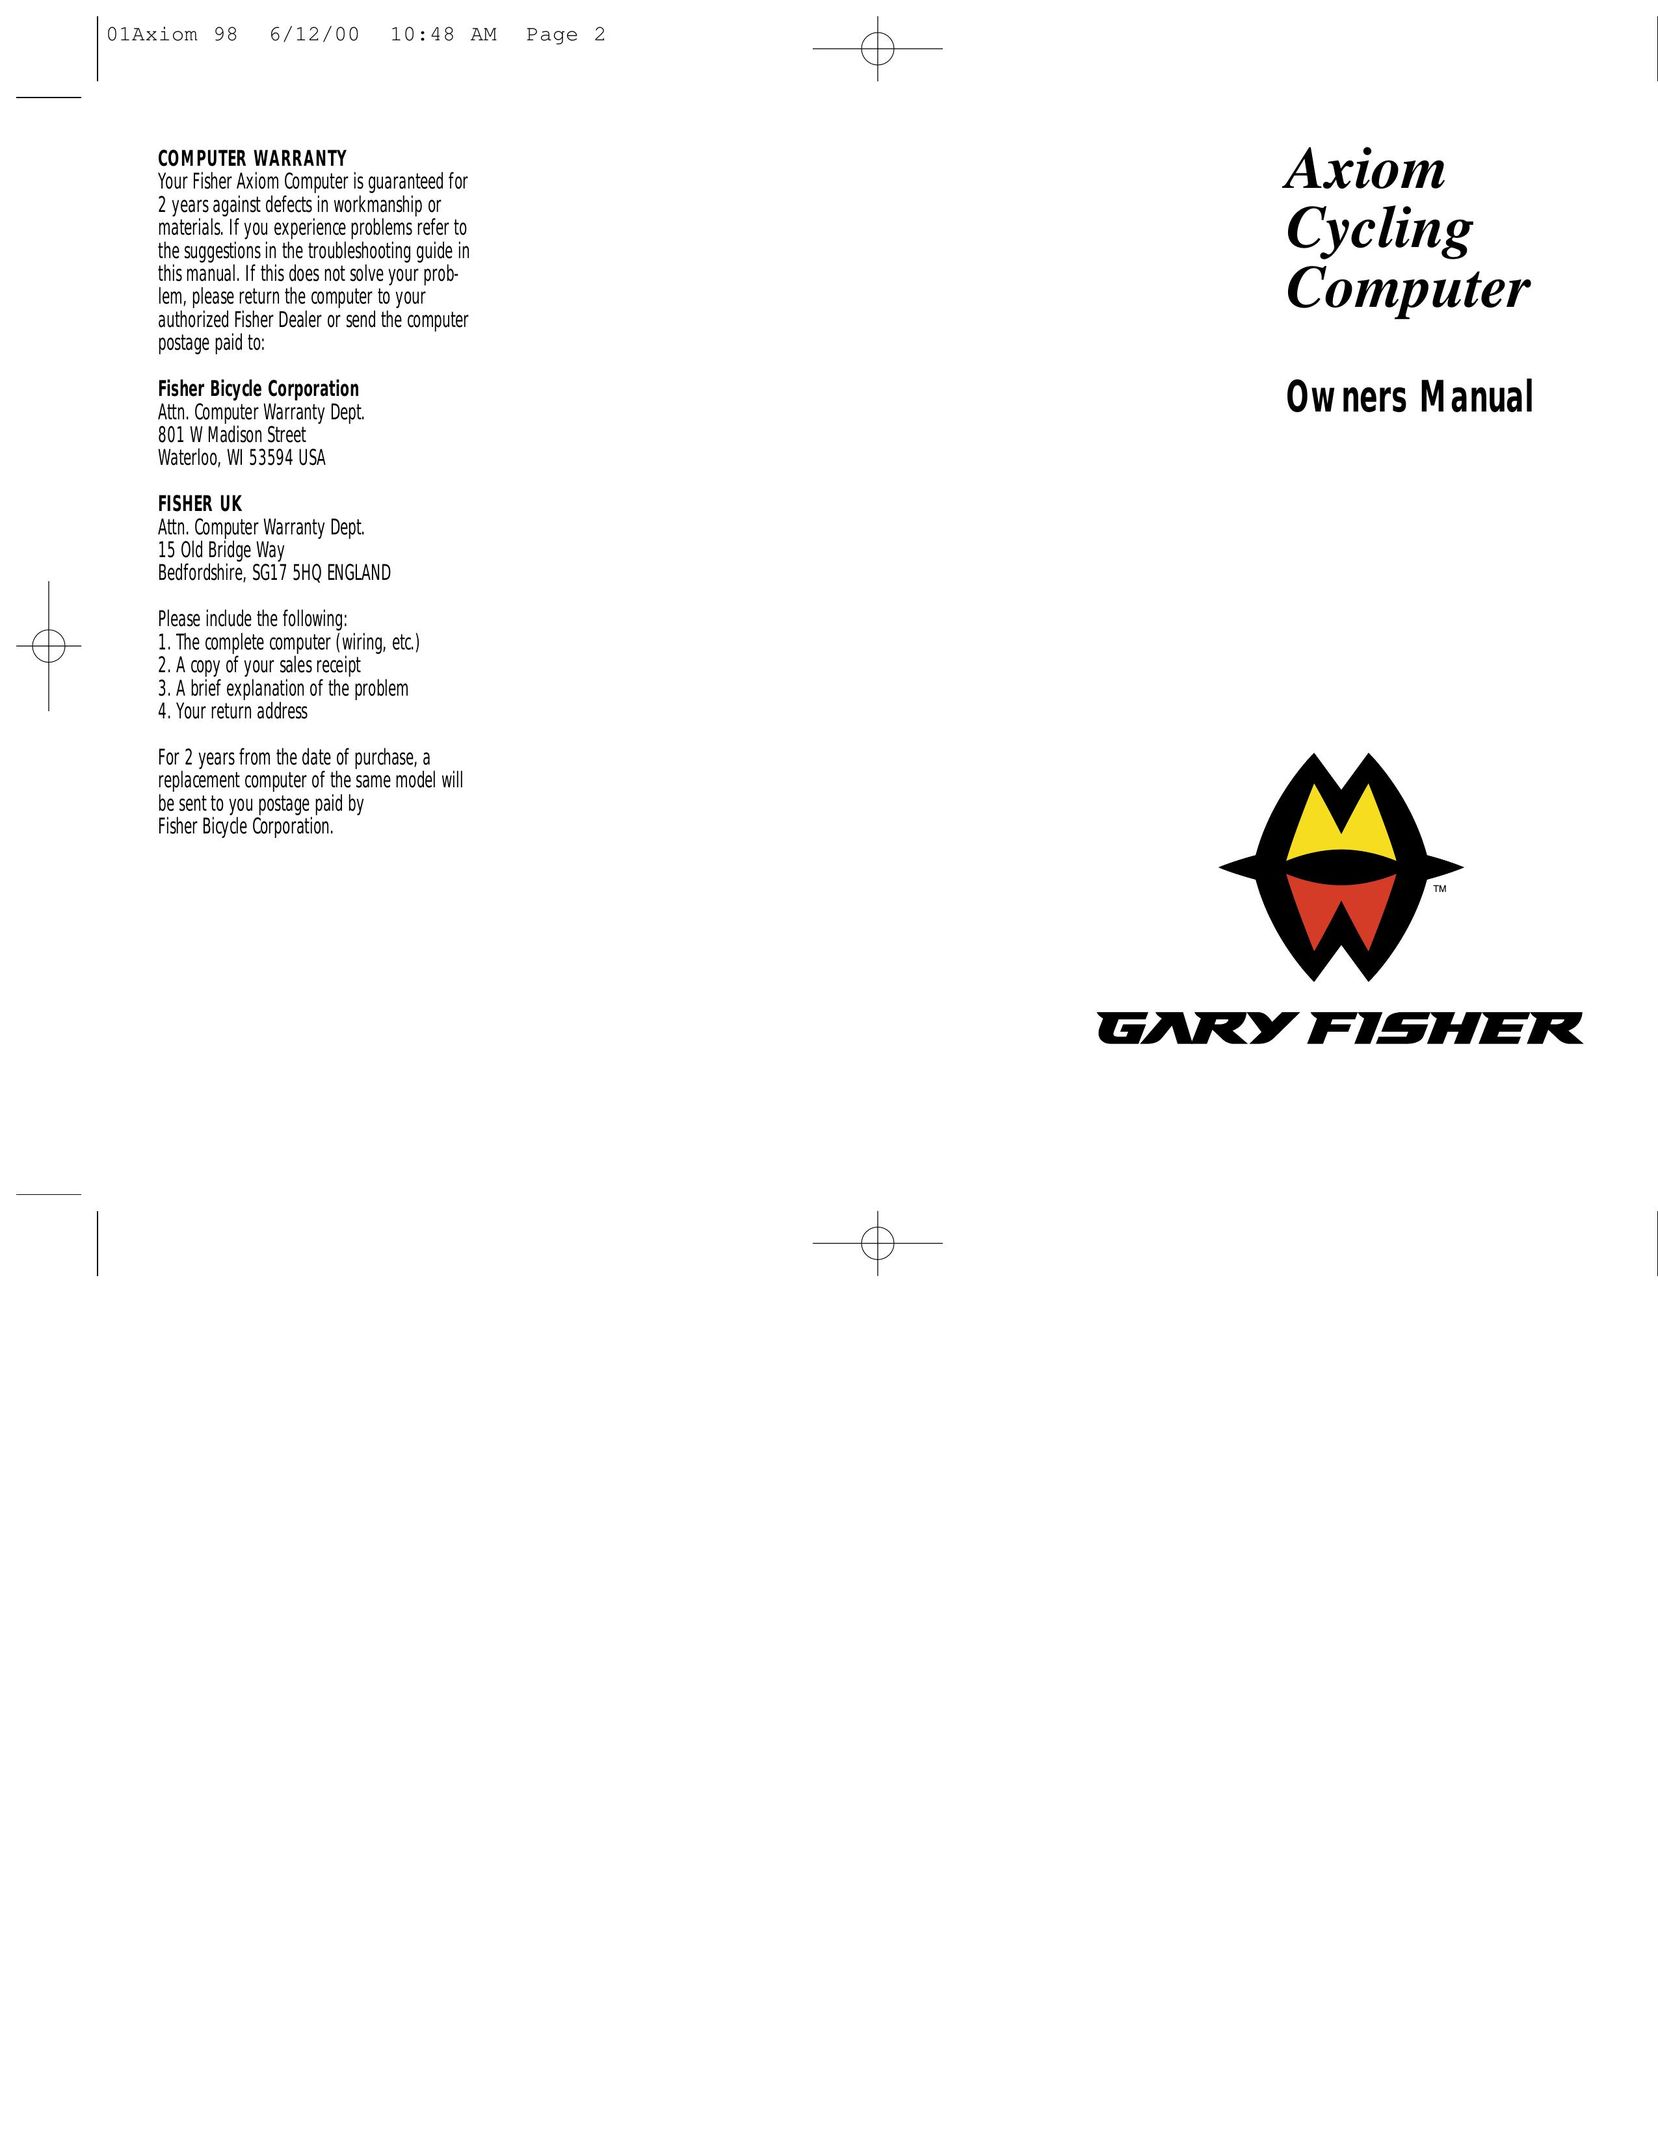 Gary Fisher Axiom Cycling Computer Kitchen Entertainment Center User Manual